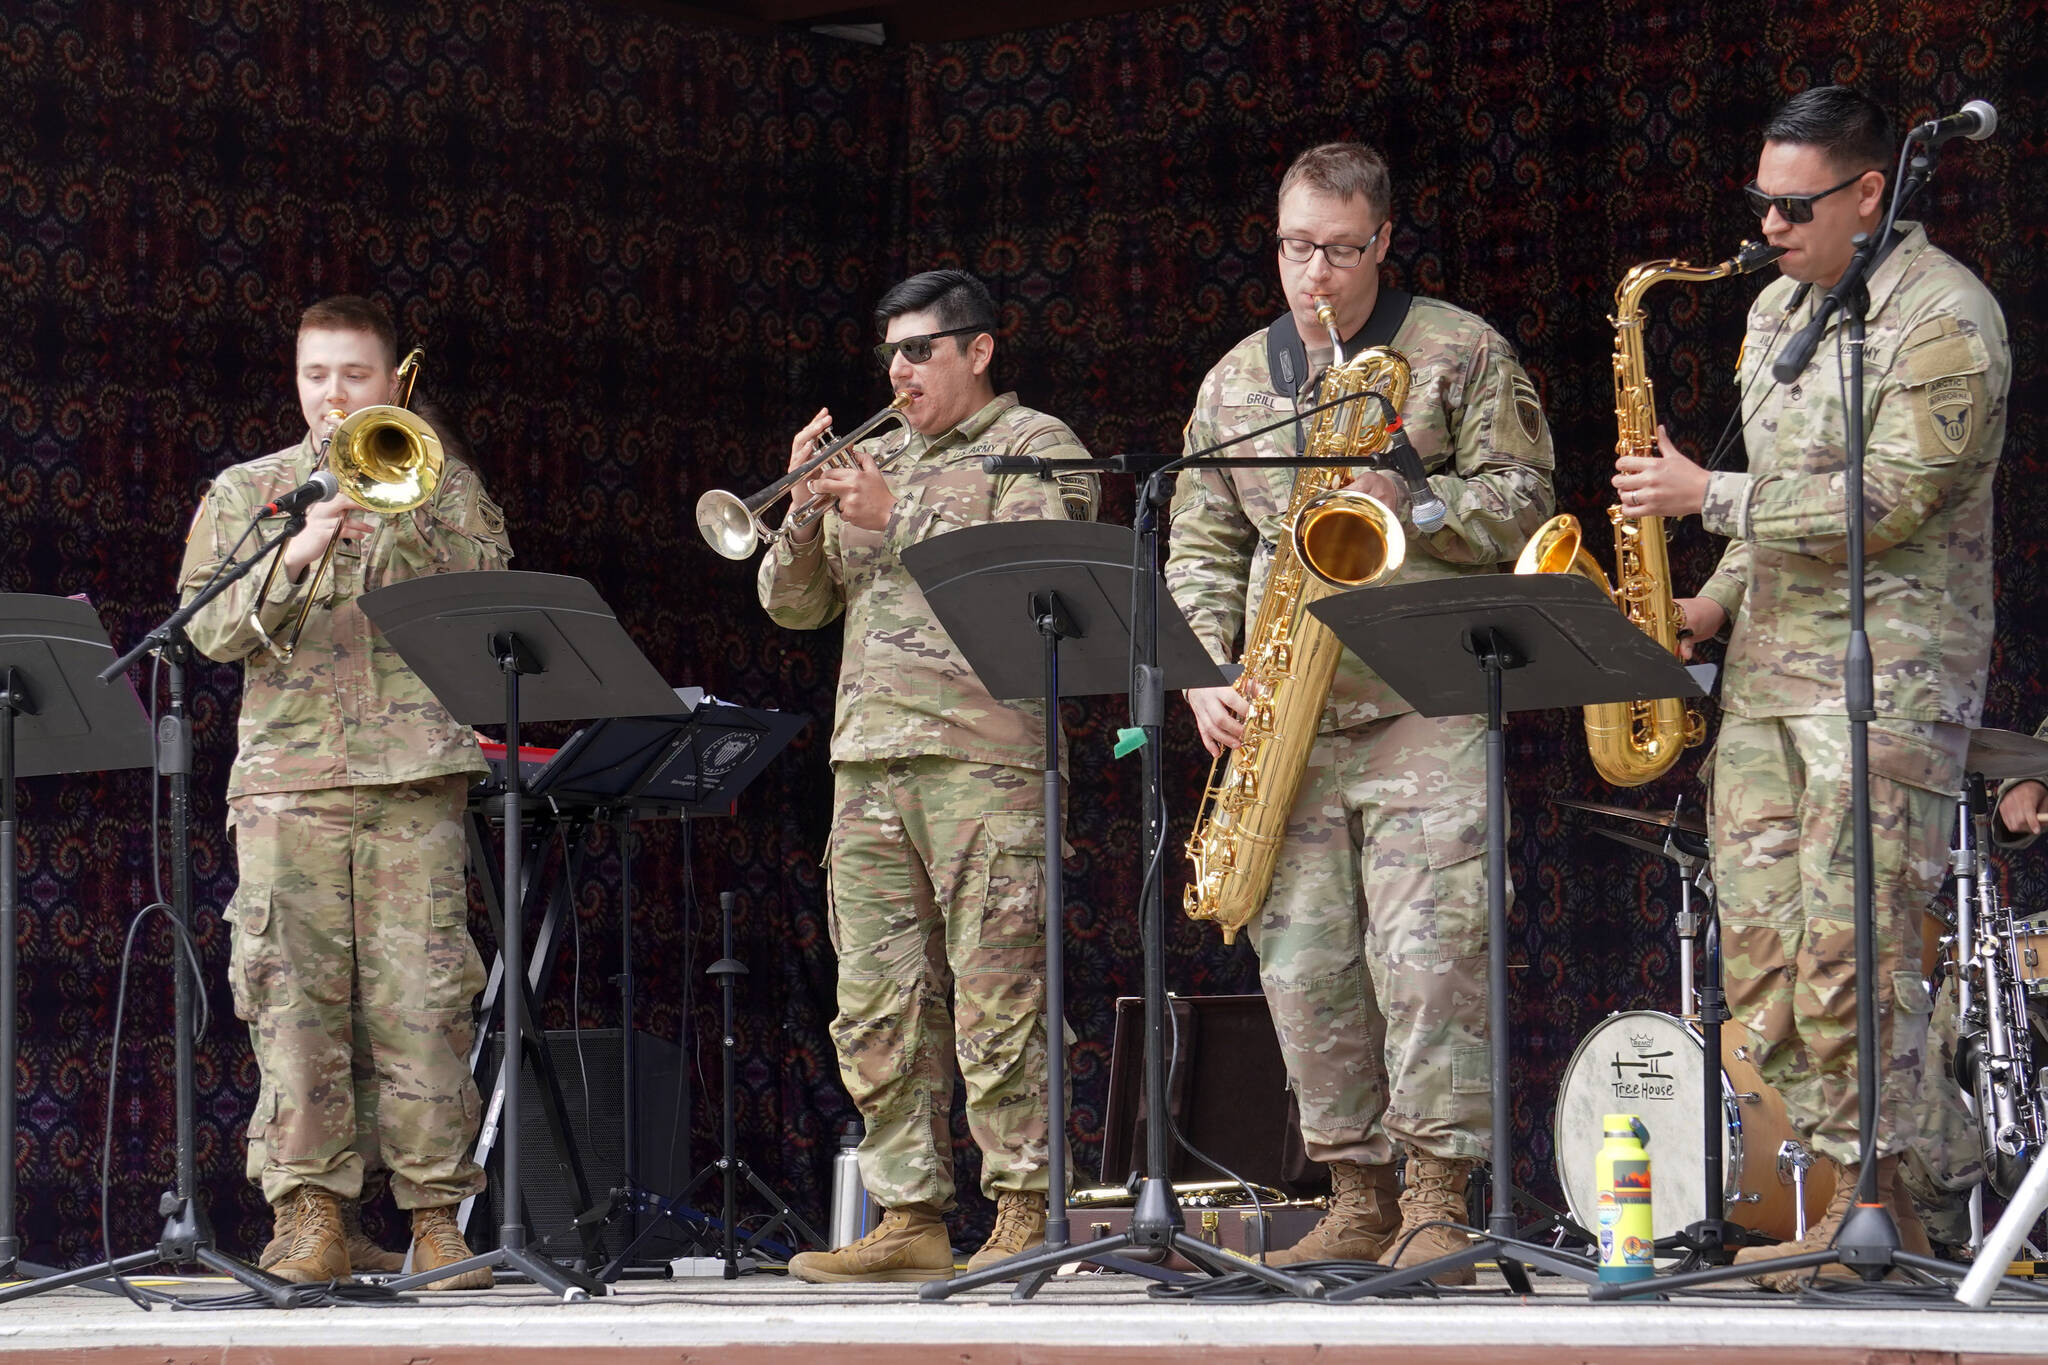 The 11th Airborne Division Band performs in the amphitheater at the Kenai Peninsula Fair in Ninilchik, Alaska, on Friday, Aug. 11, 2023. (Jake Dye/Peninsula Clarion)